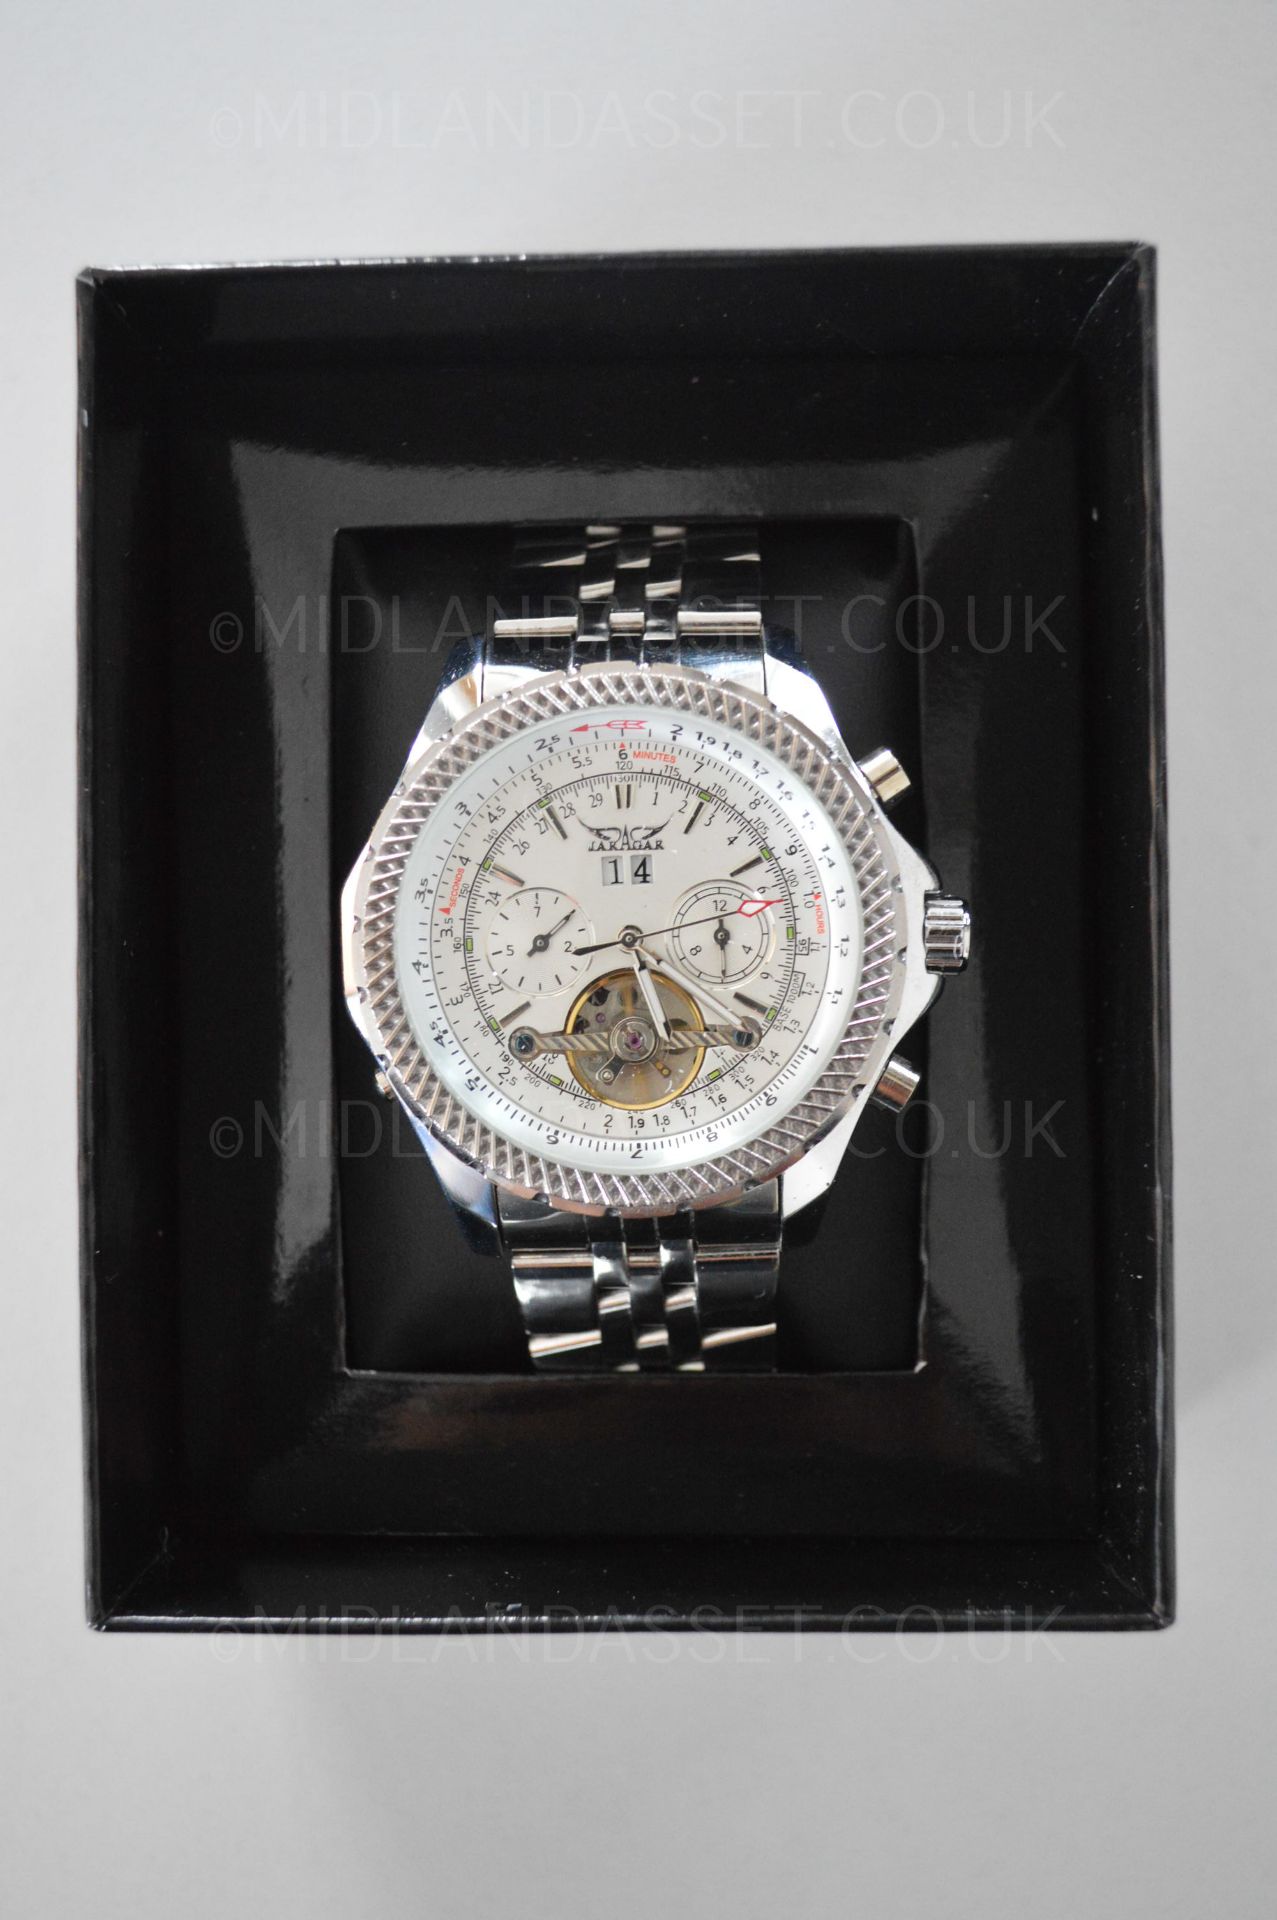 NEW MENS CHRONOGRAPH WATCH 50MM FACE - BIG WATCH